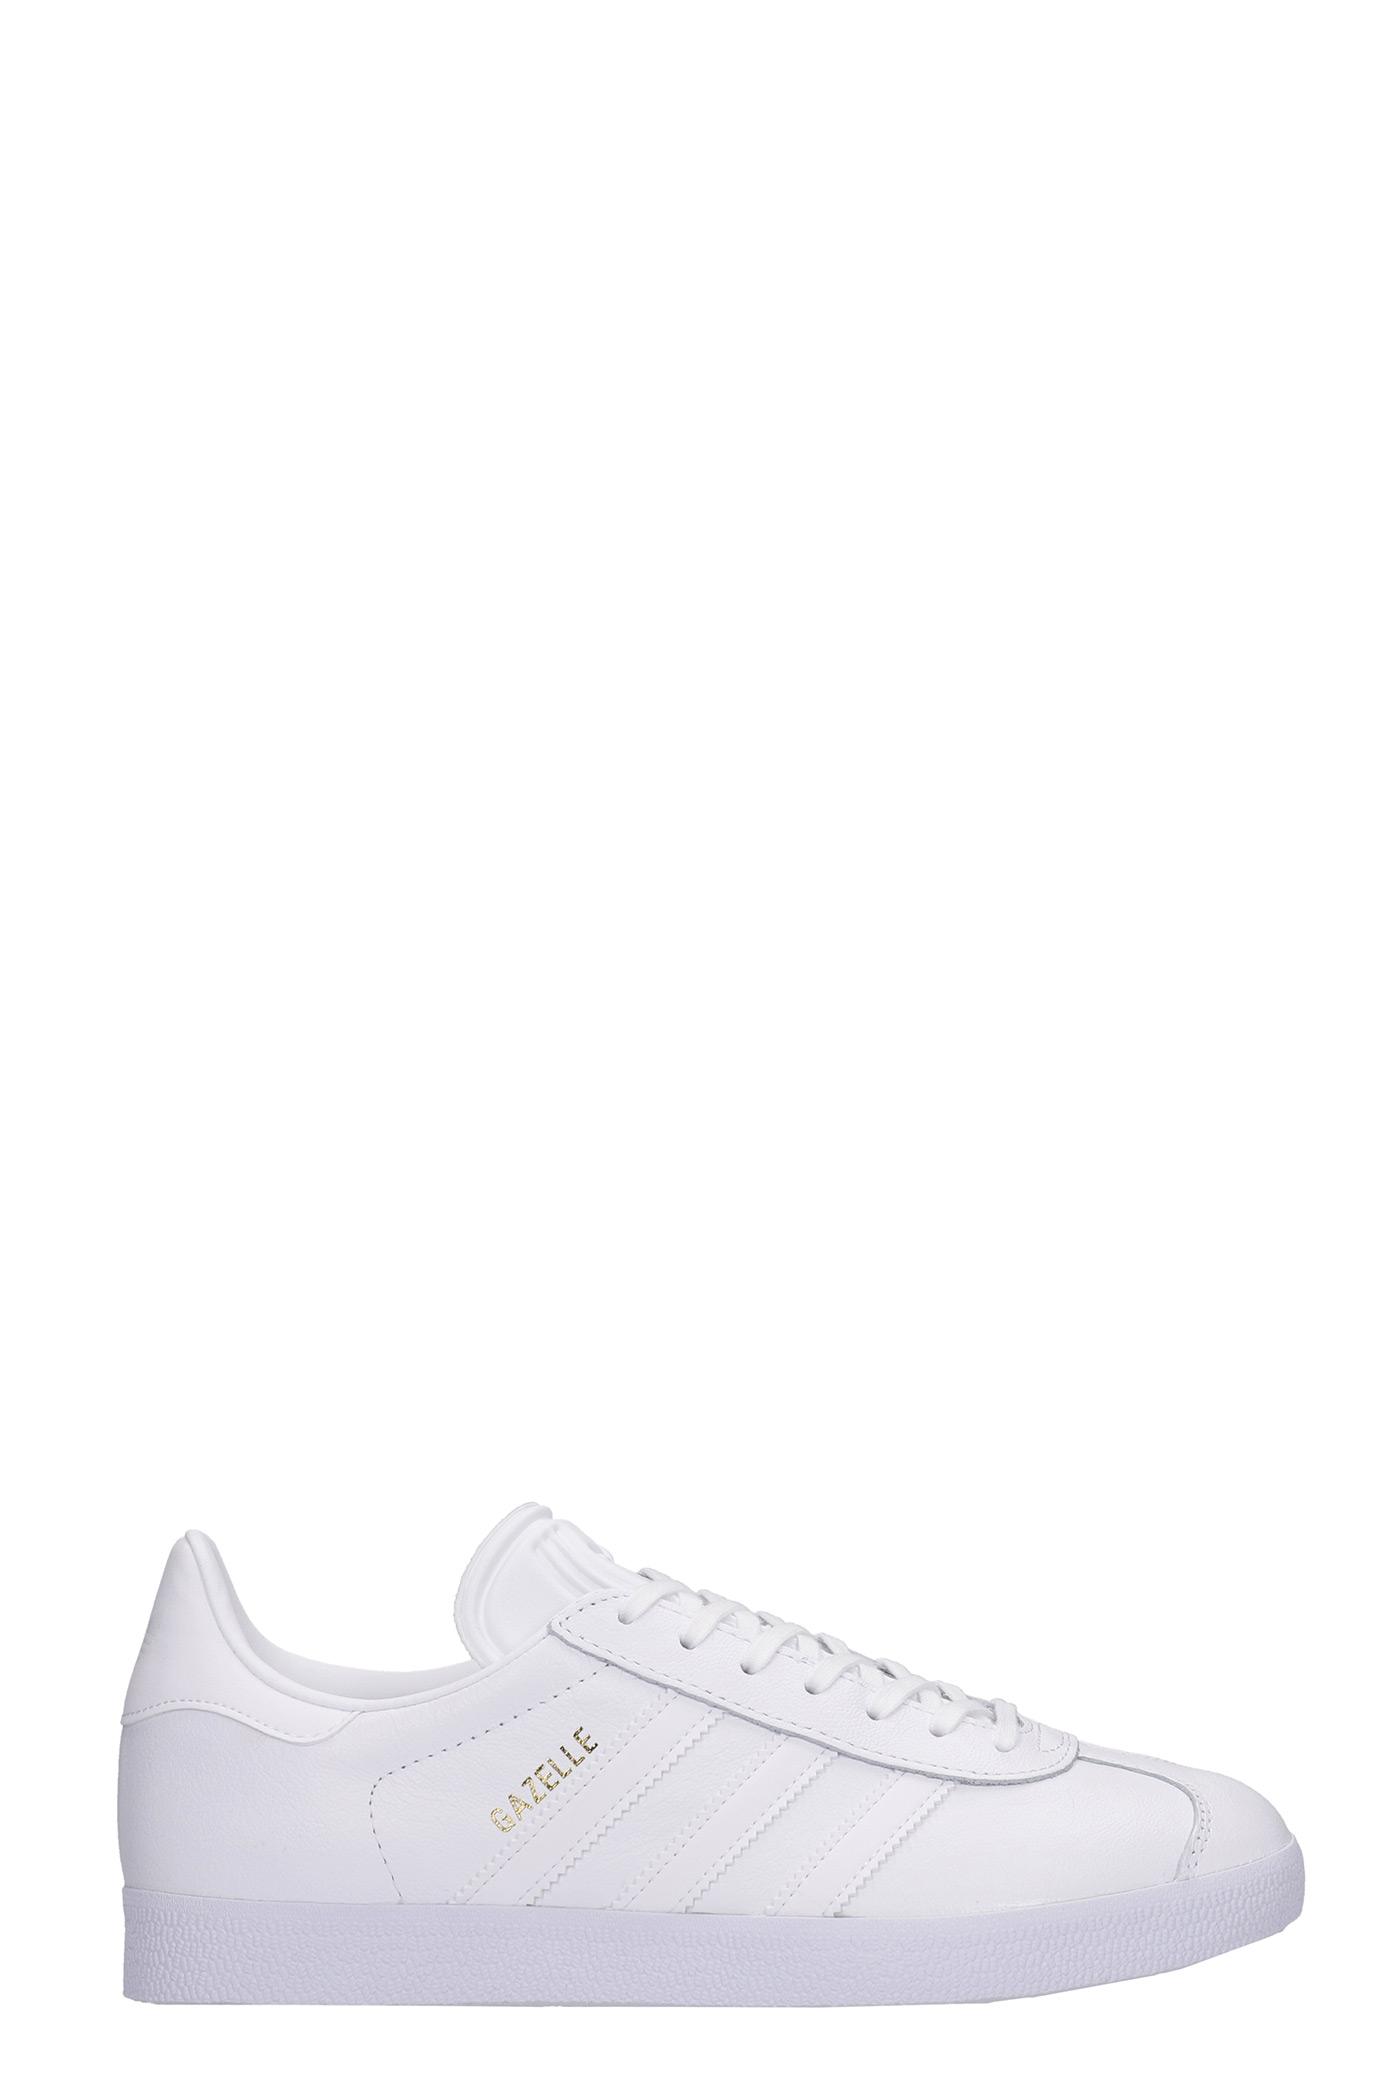 adidas Gazelle Sneakers In White Leather for Men - Lyst